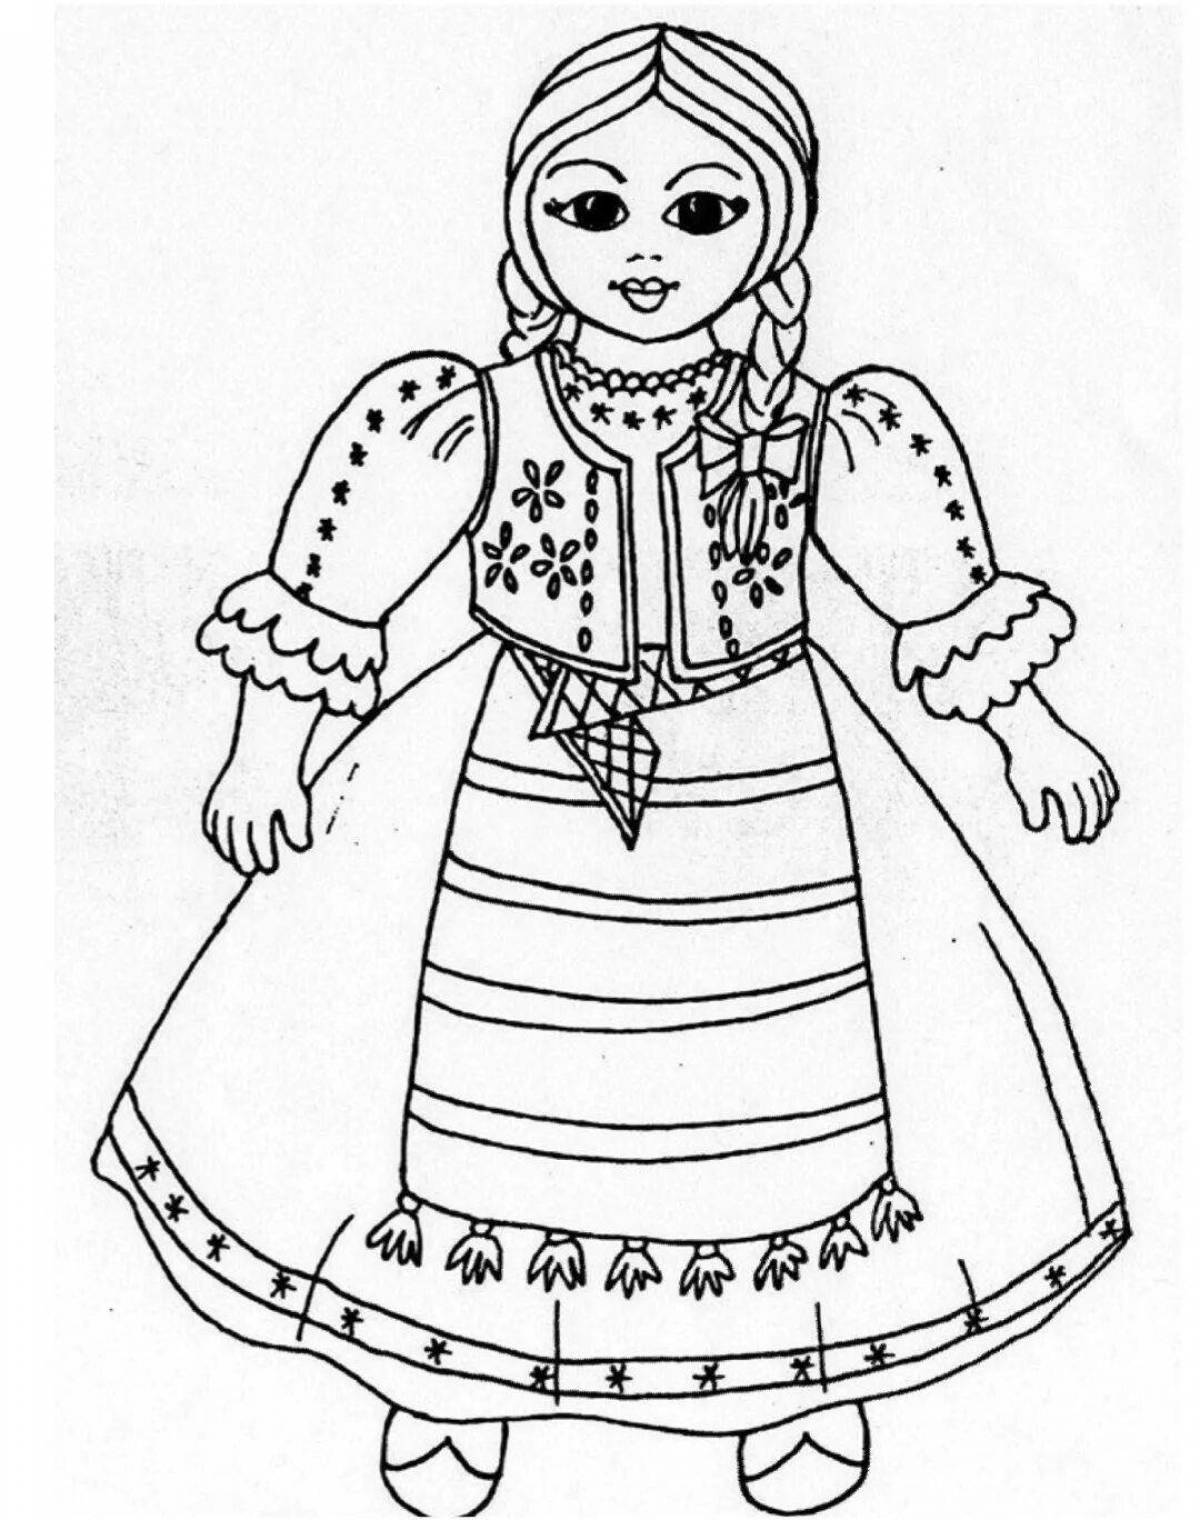 Large doll in national costume